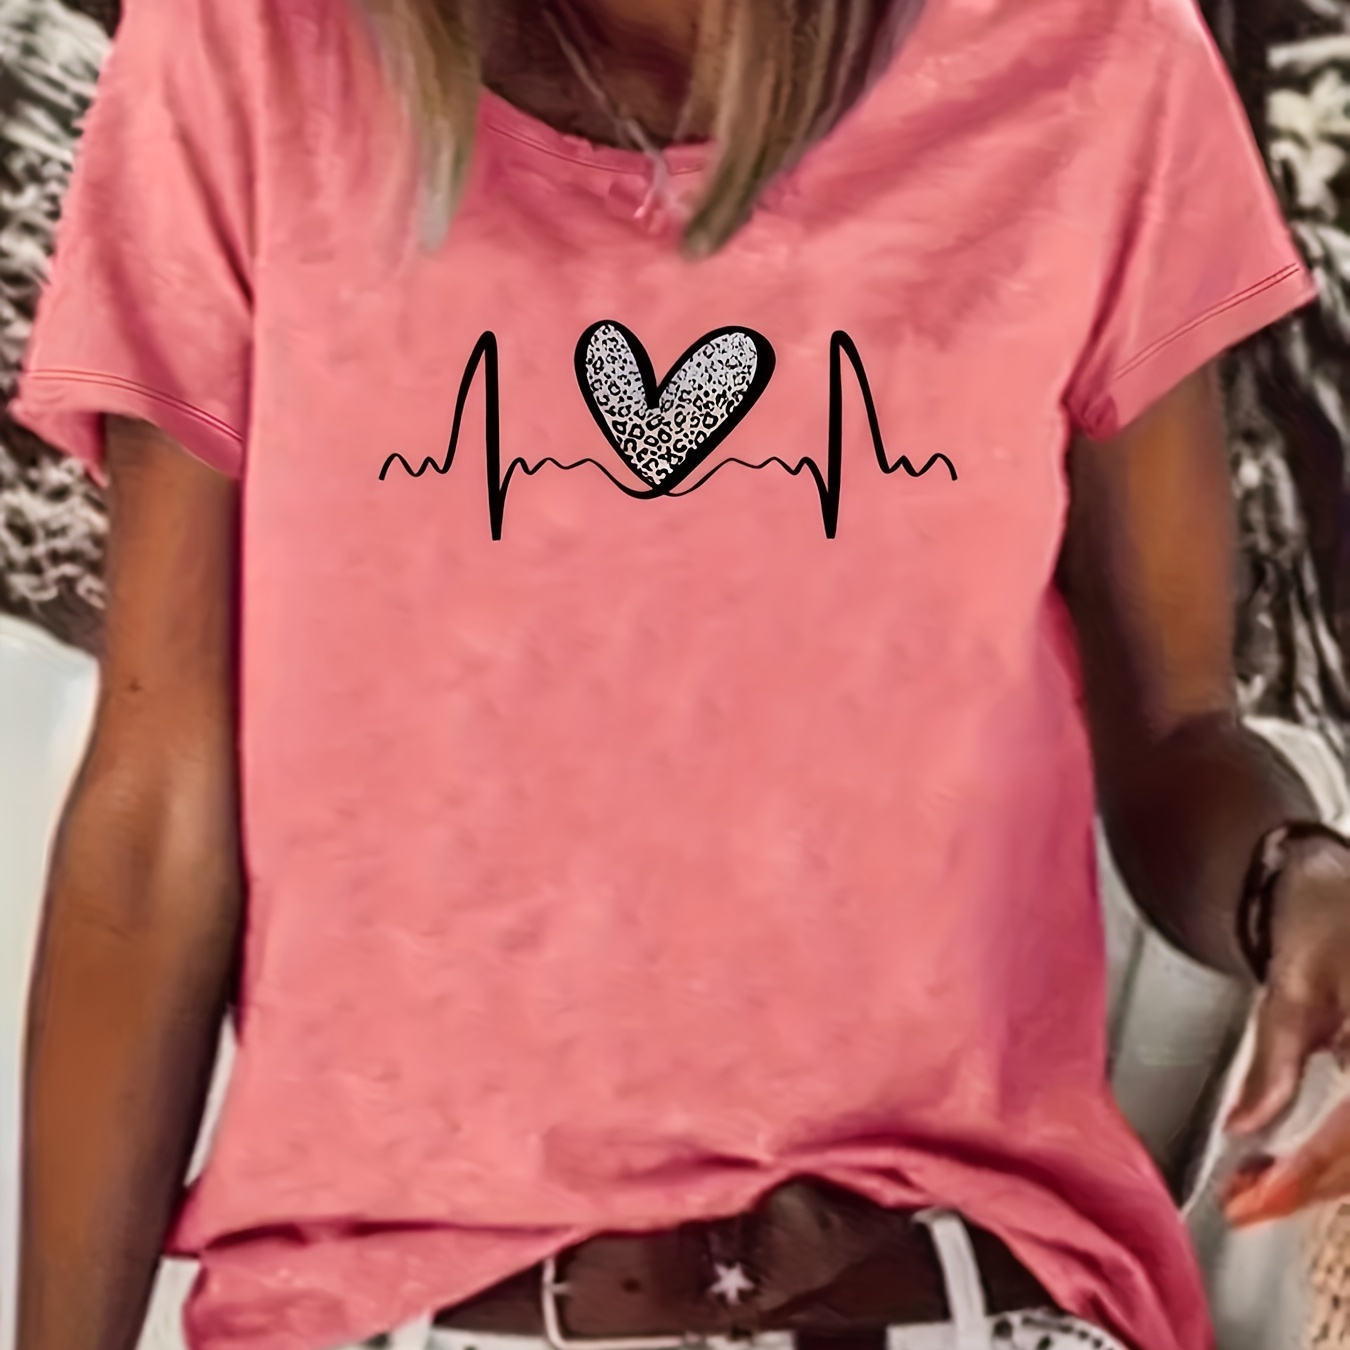 

Heart Print Crew Neck T-shirt, Casual Short Sleeve Top For Spring & Summer, Women's Clothing